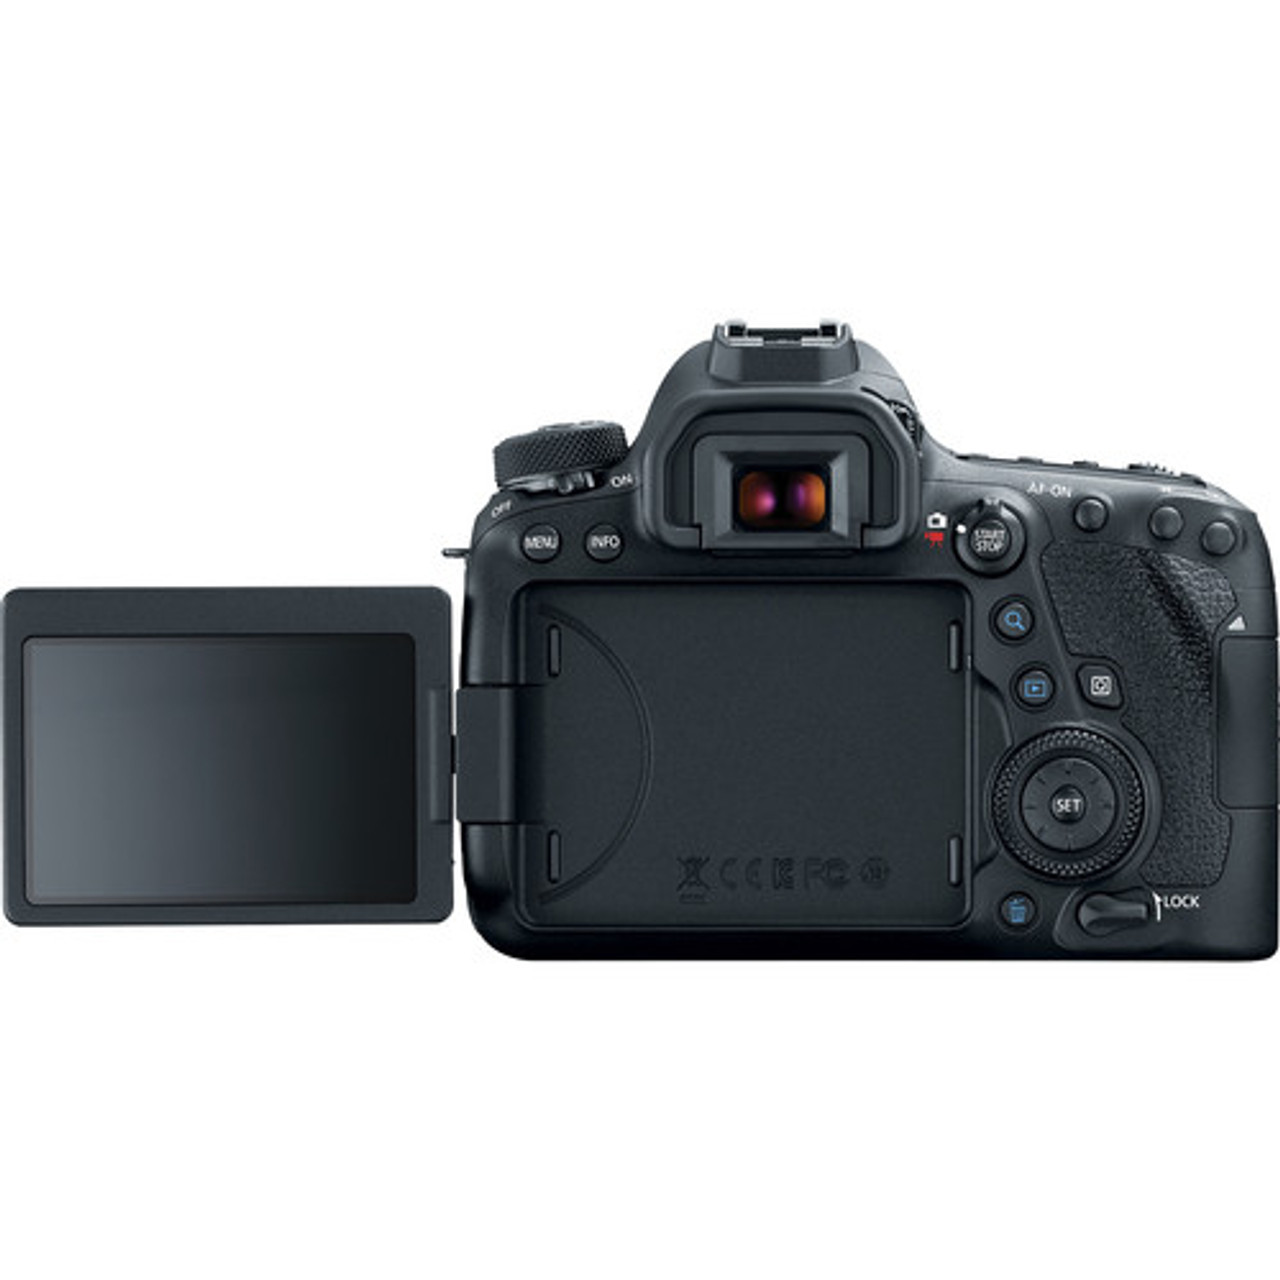 EOS 6D Mark II: What You Should Know About Dual Pixel CMOS AF and Live View  AF